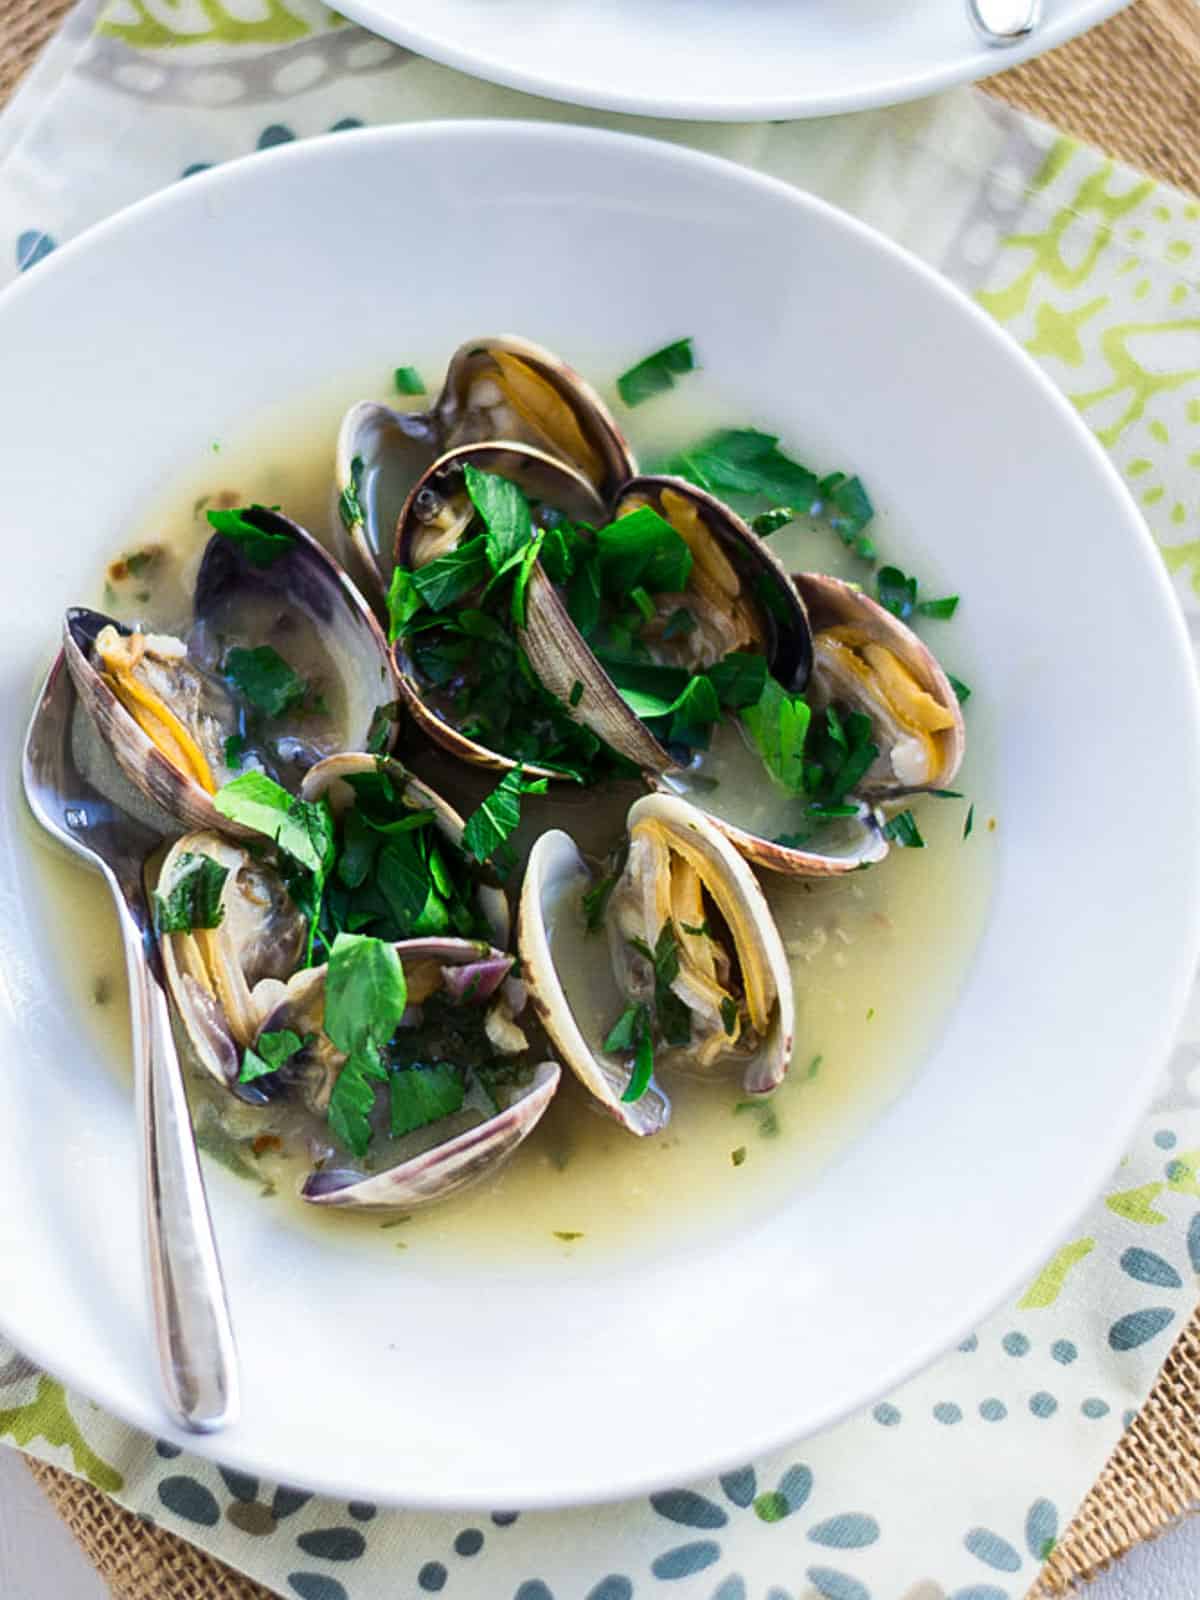 Spanish style clams in salsa verde with white, olive oil and fresh parsley.